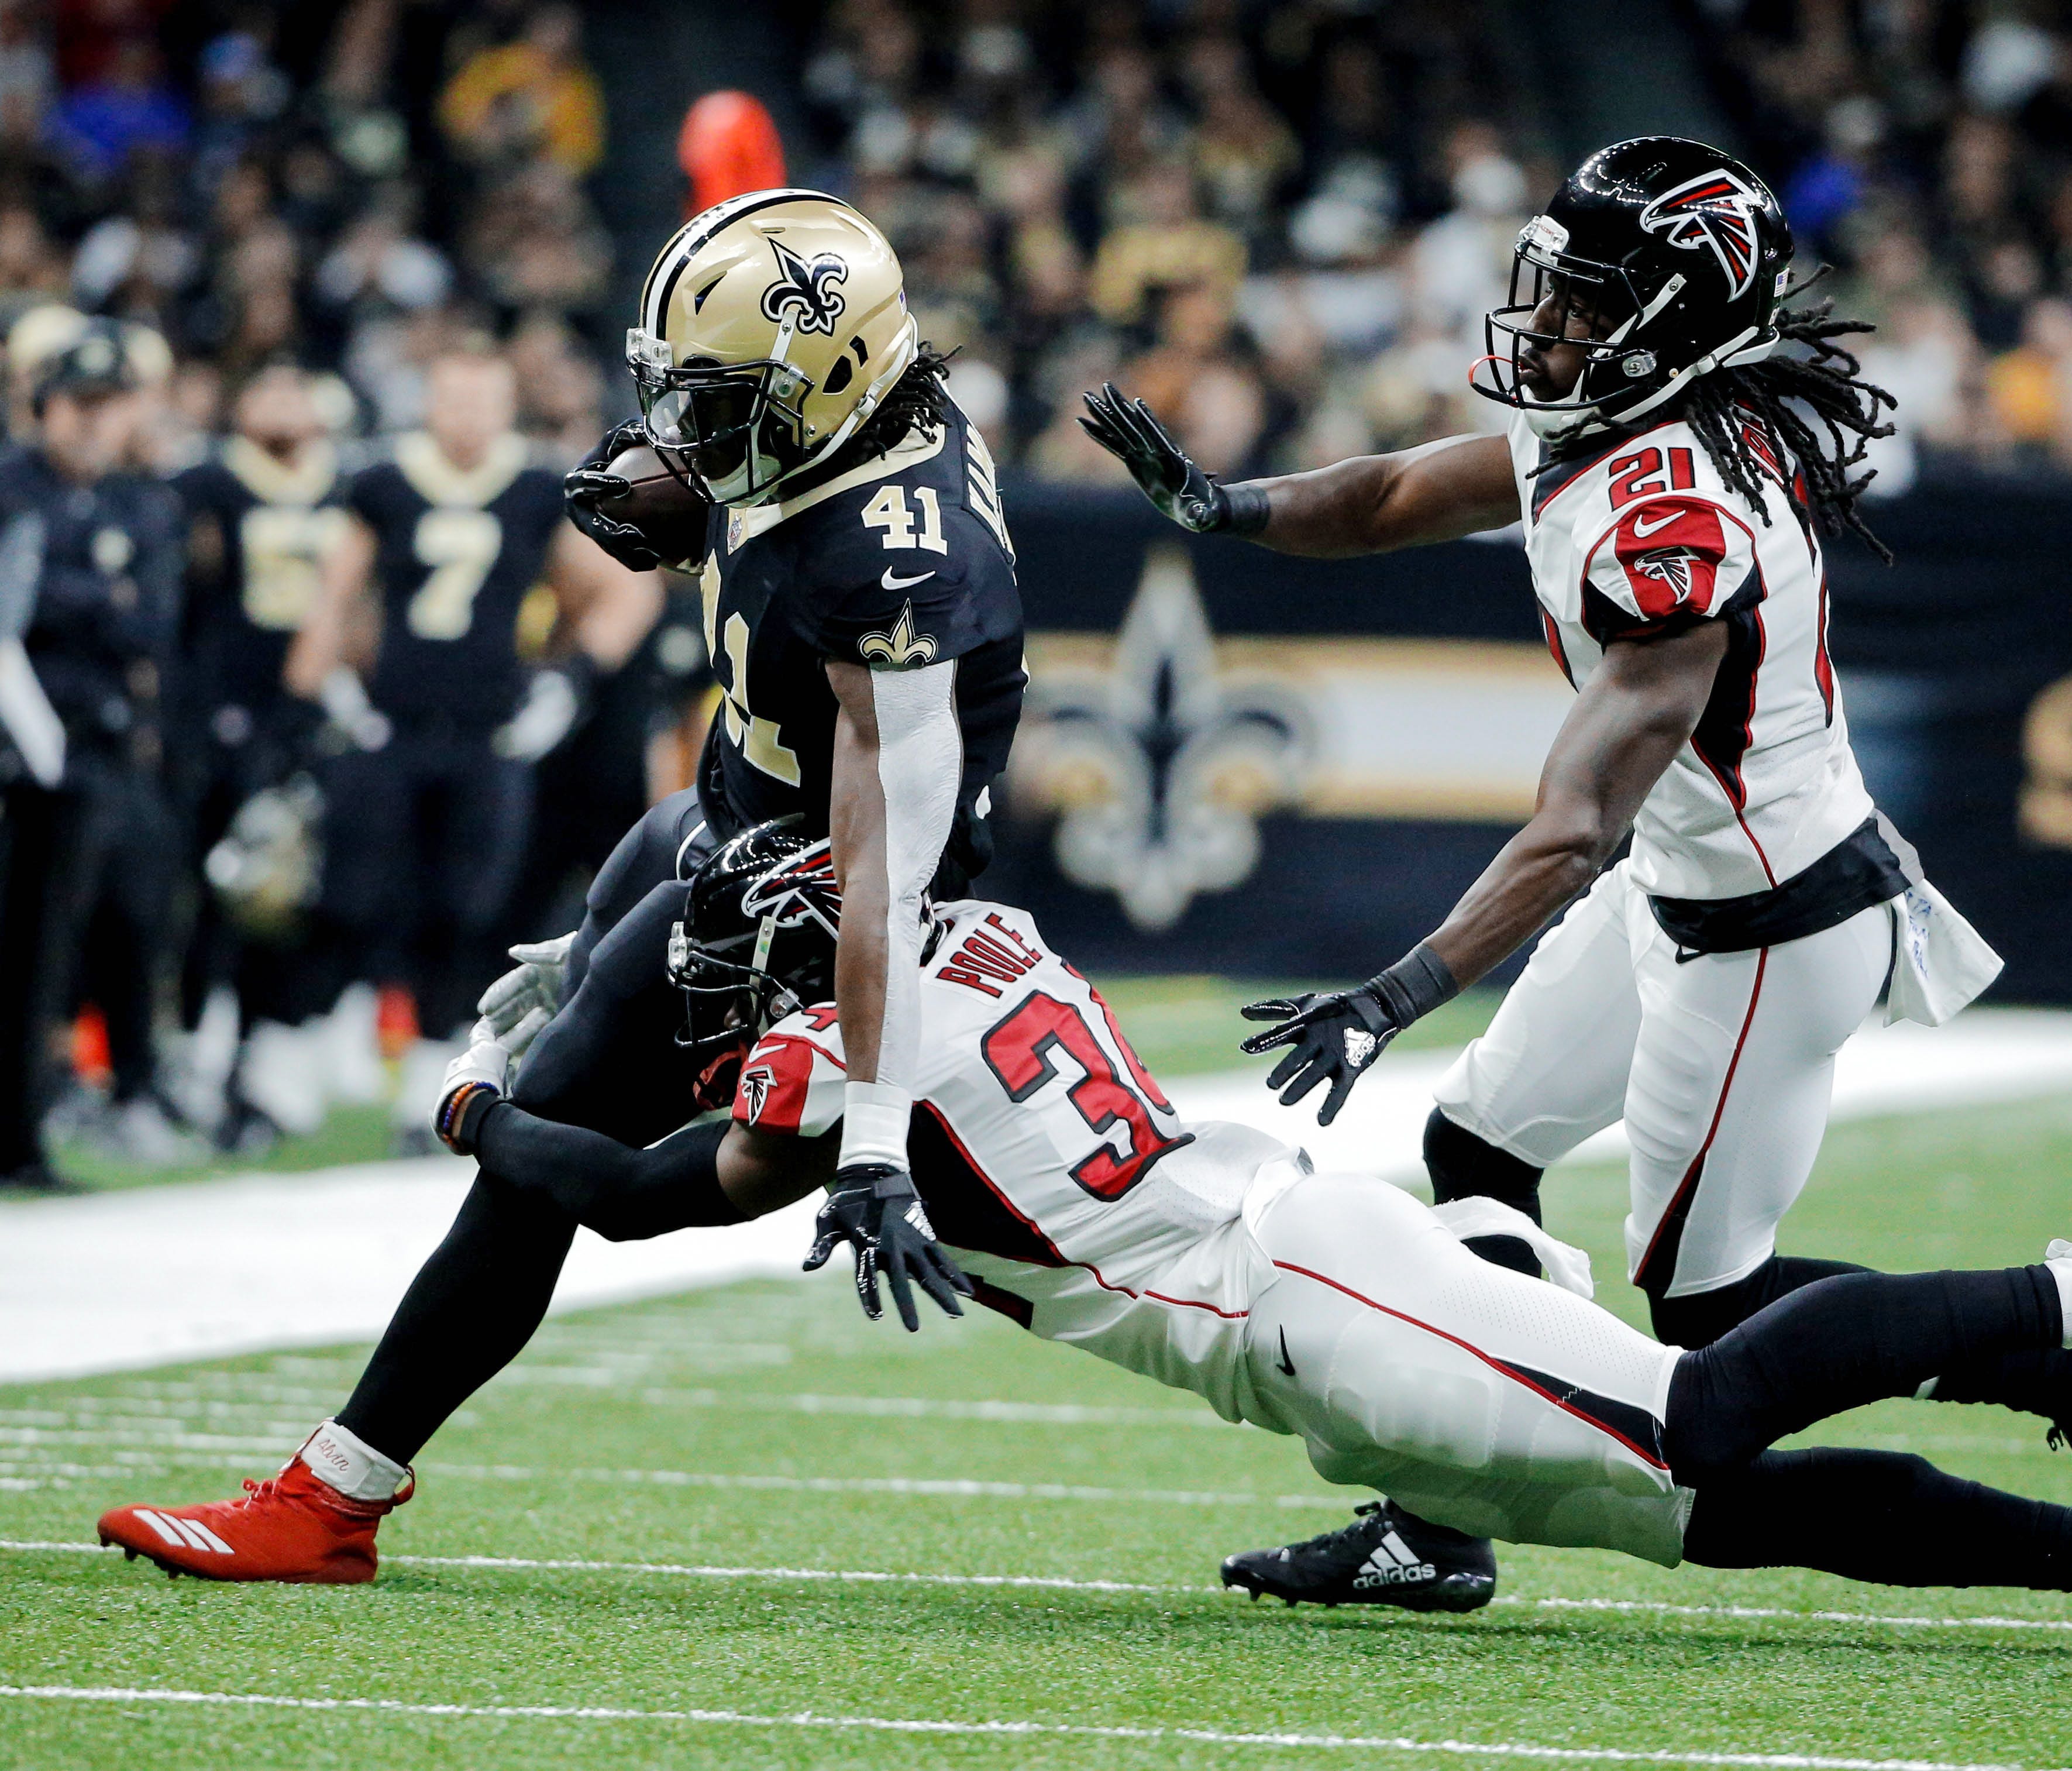 New Orleans Saints running back Alvin Kamara (41) is tackled by Atlanta Falcons cornerback Brian Poole (34) and cornerback Desmond Trufant (21) during the first quarter at the Mercedes-Benz Superdome.